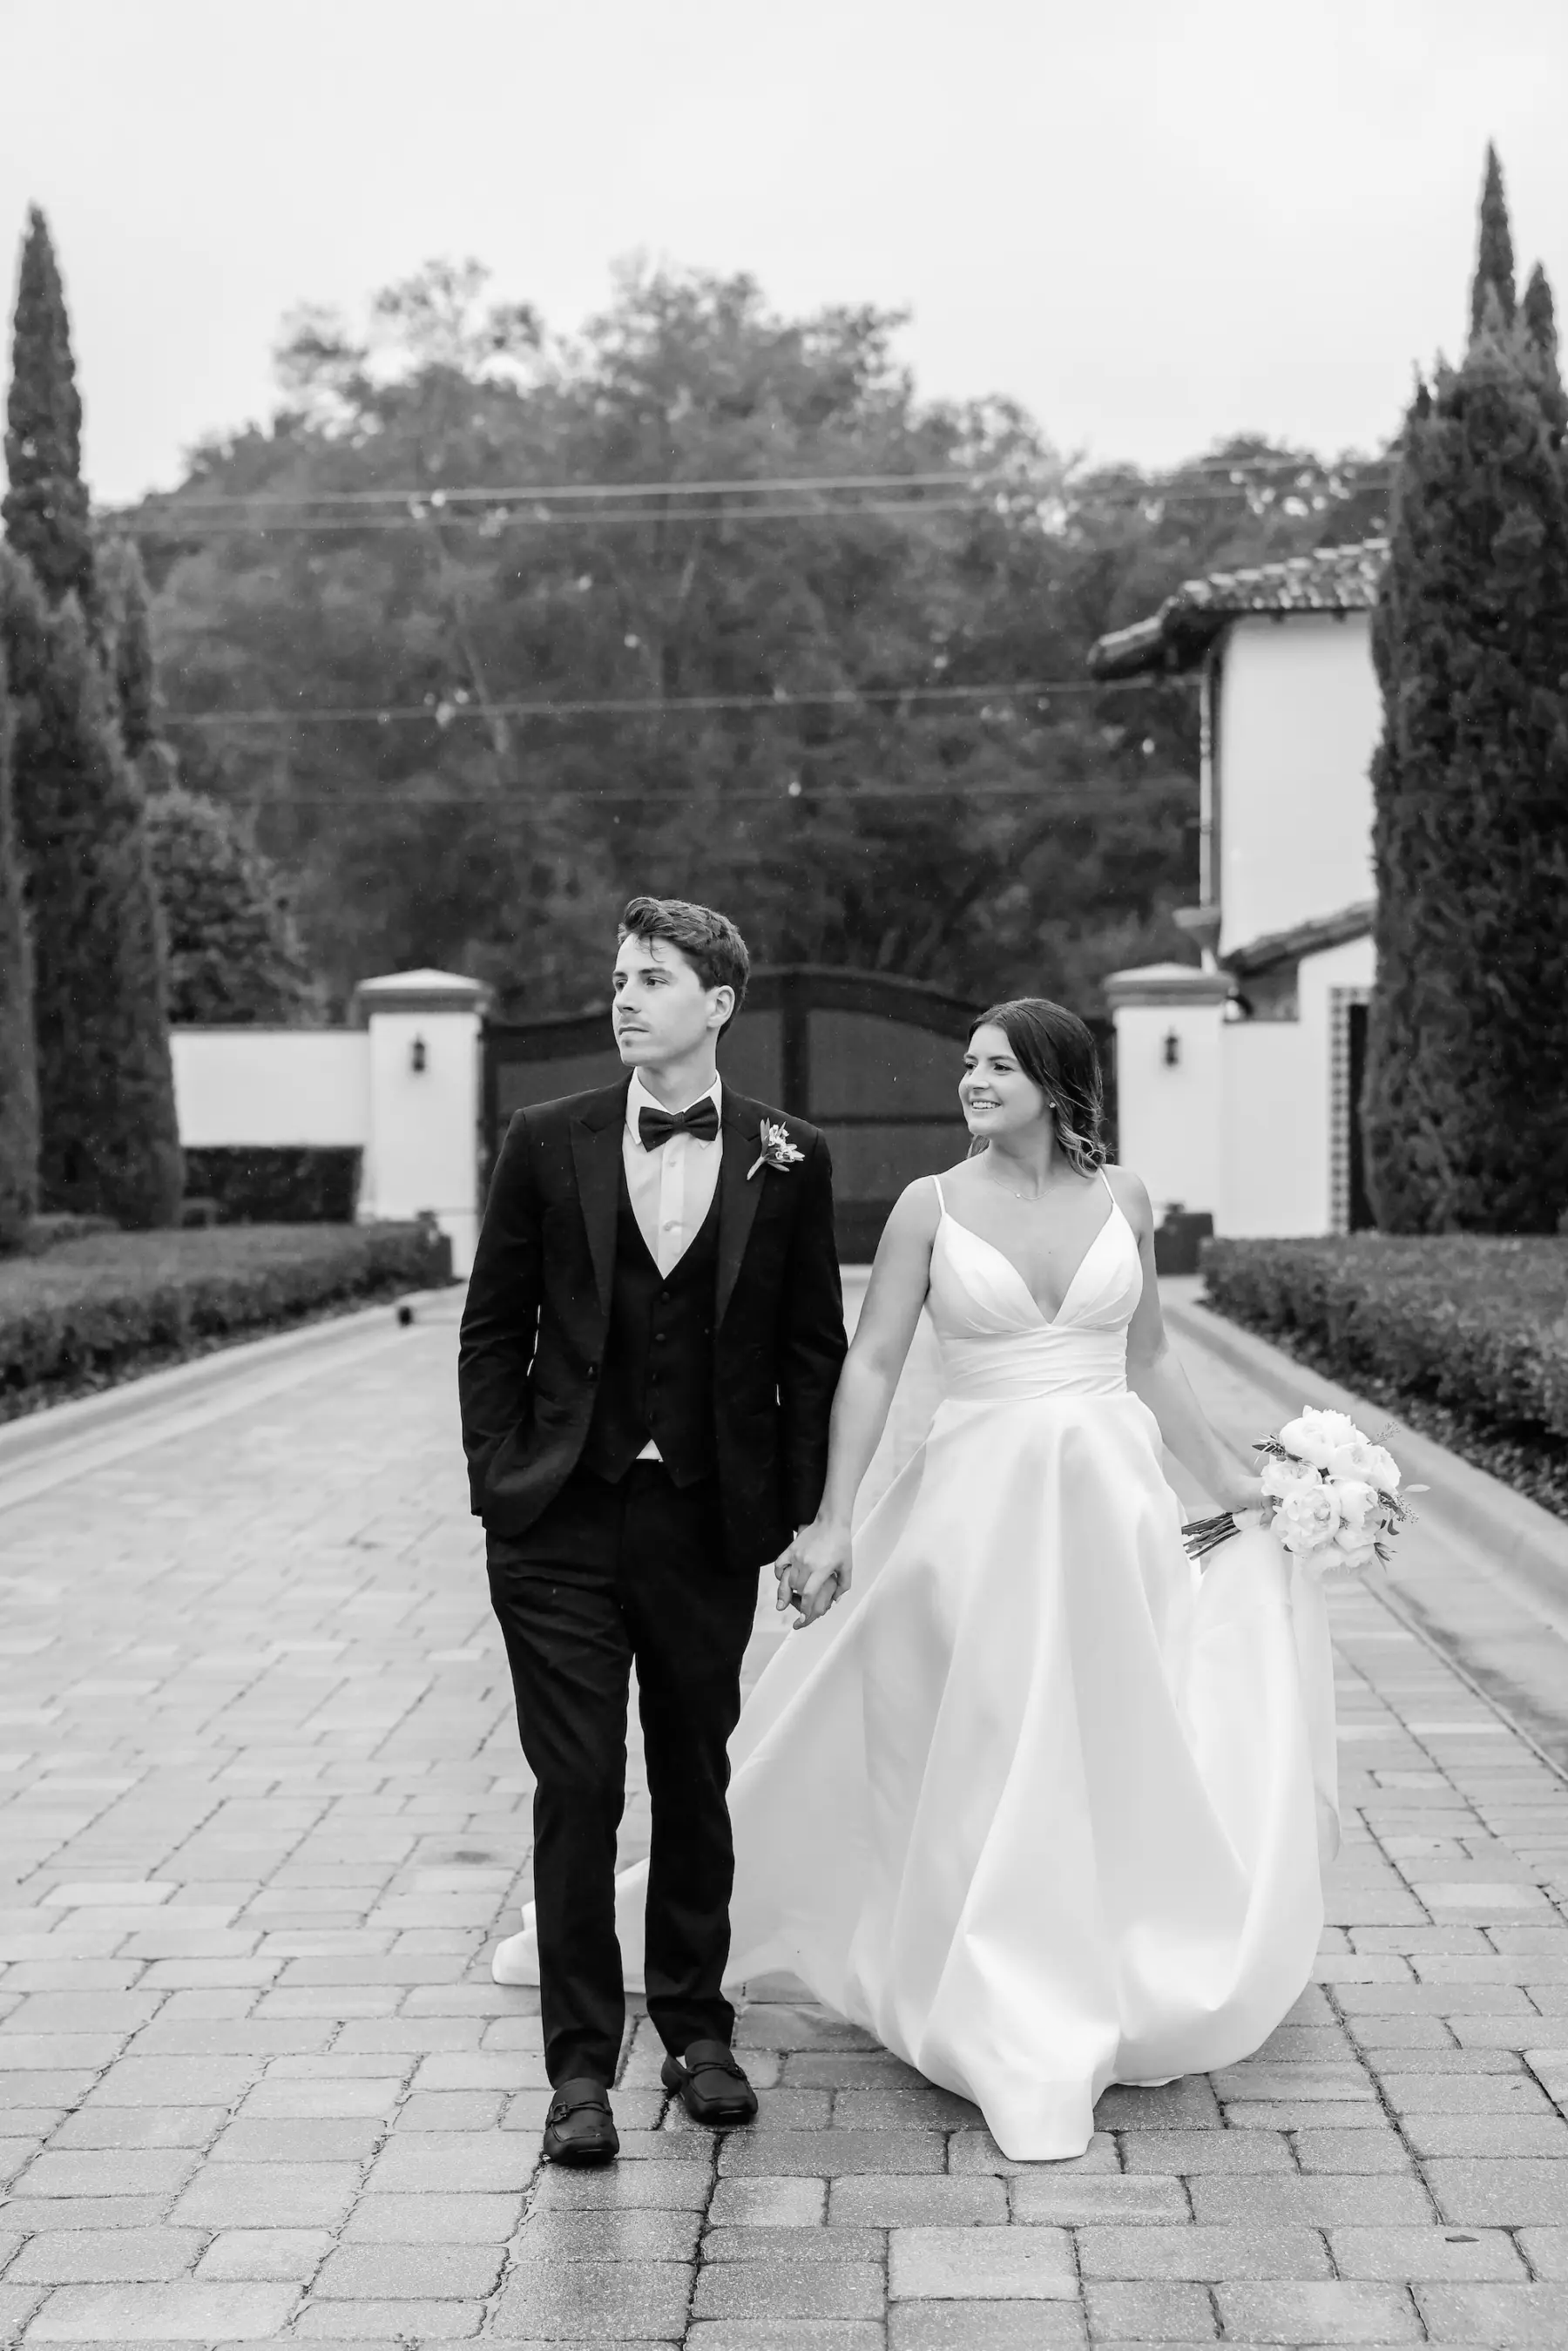 Bride and Groom Just Married Black and White Wedding Portrait | Tampa Bay Photographer Lifelong Photography Studio | Vineyard Event Venue Mision Lago Estate | Planner Blue Skies Weddings and Events